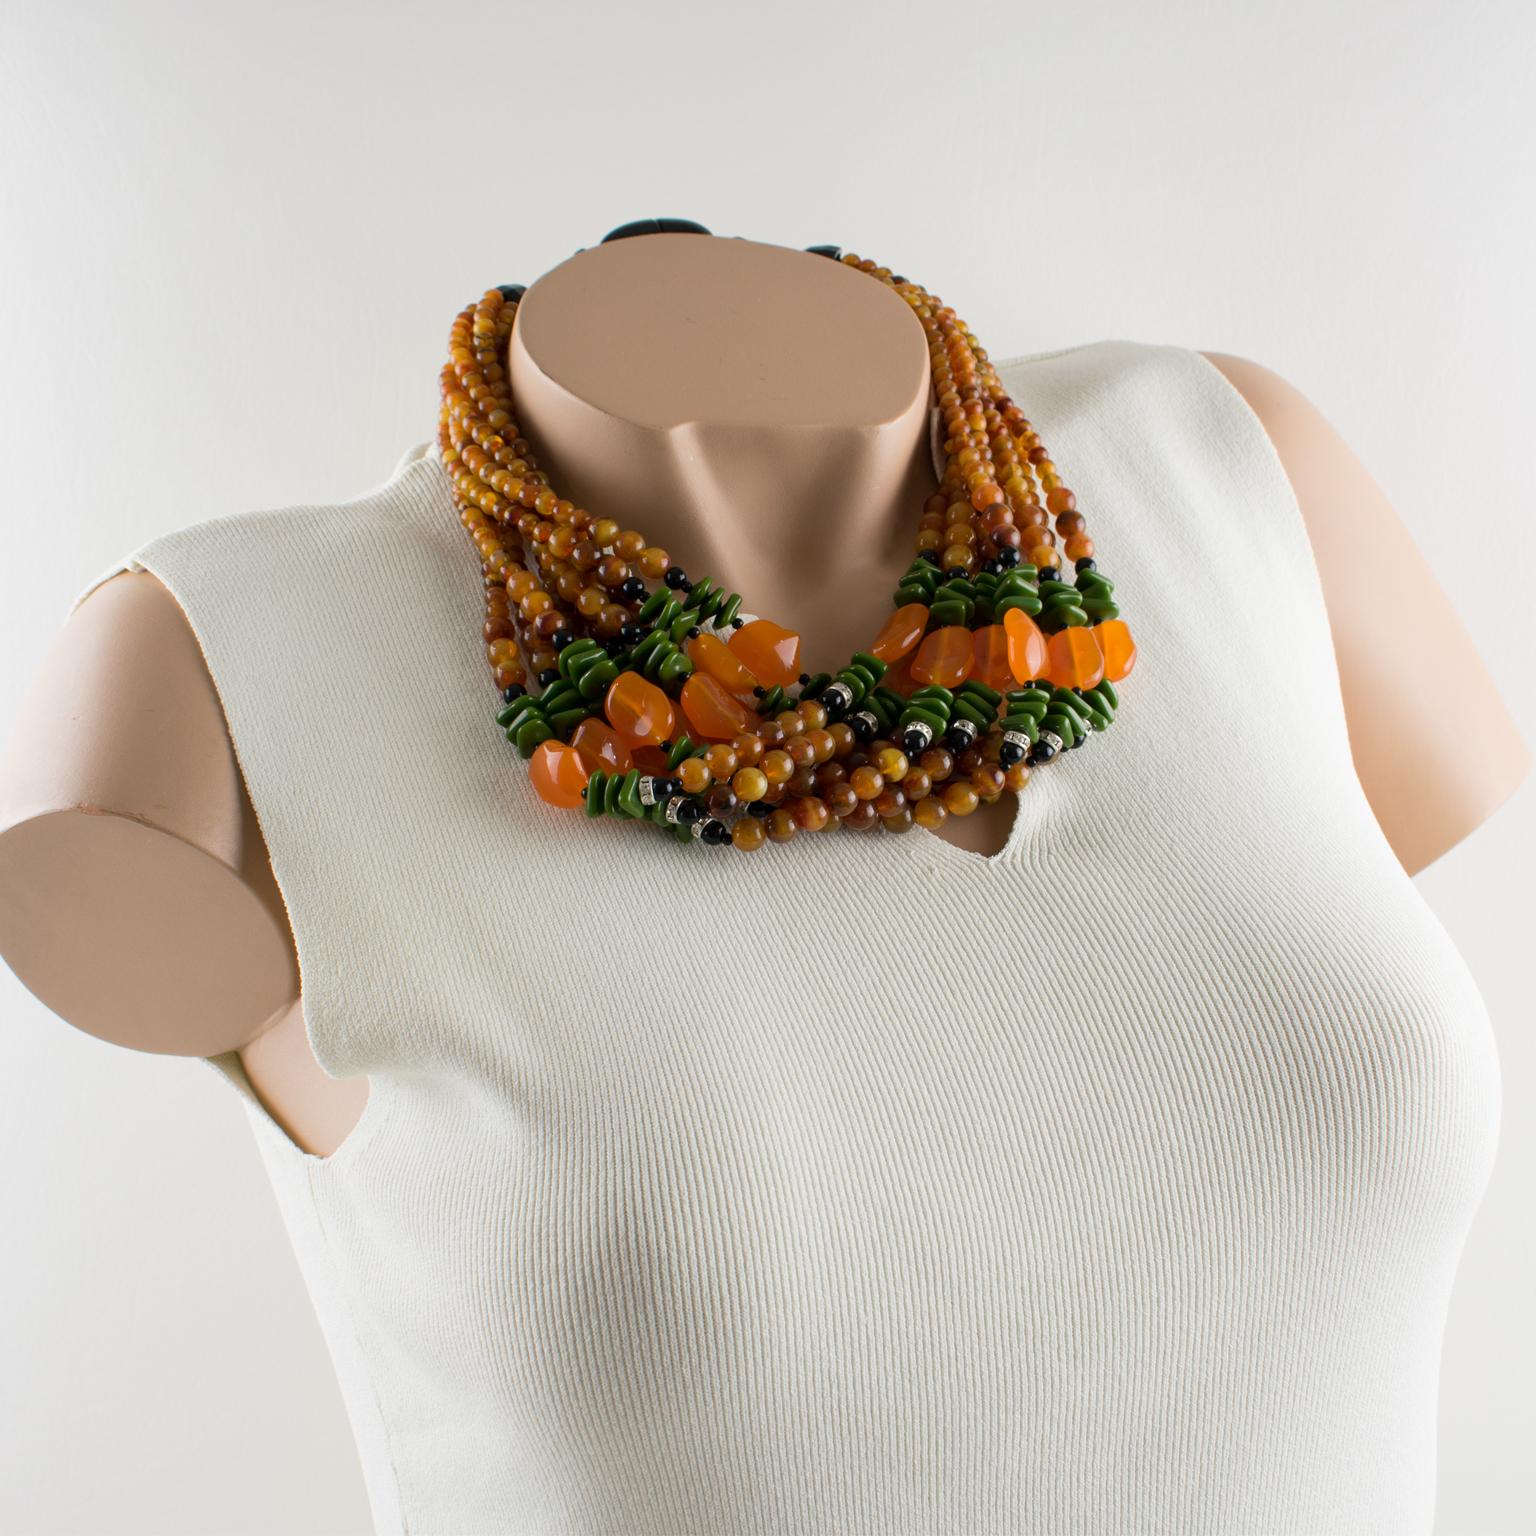 Striking Angela Caputi, made in Italy multiple strands beaded necklace. Three colors resin beads with nine strands. Assorted color range with yellow saffron marble, olive green, translucent orange, and black and compliment with clear rhinestones